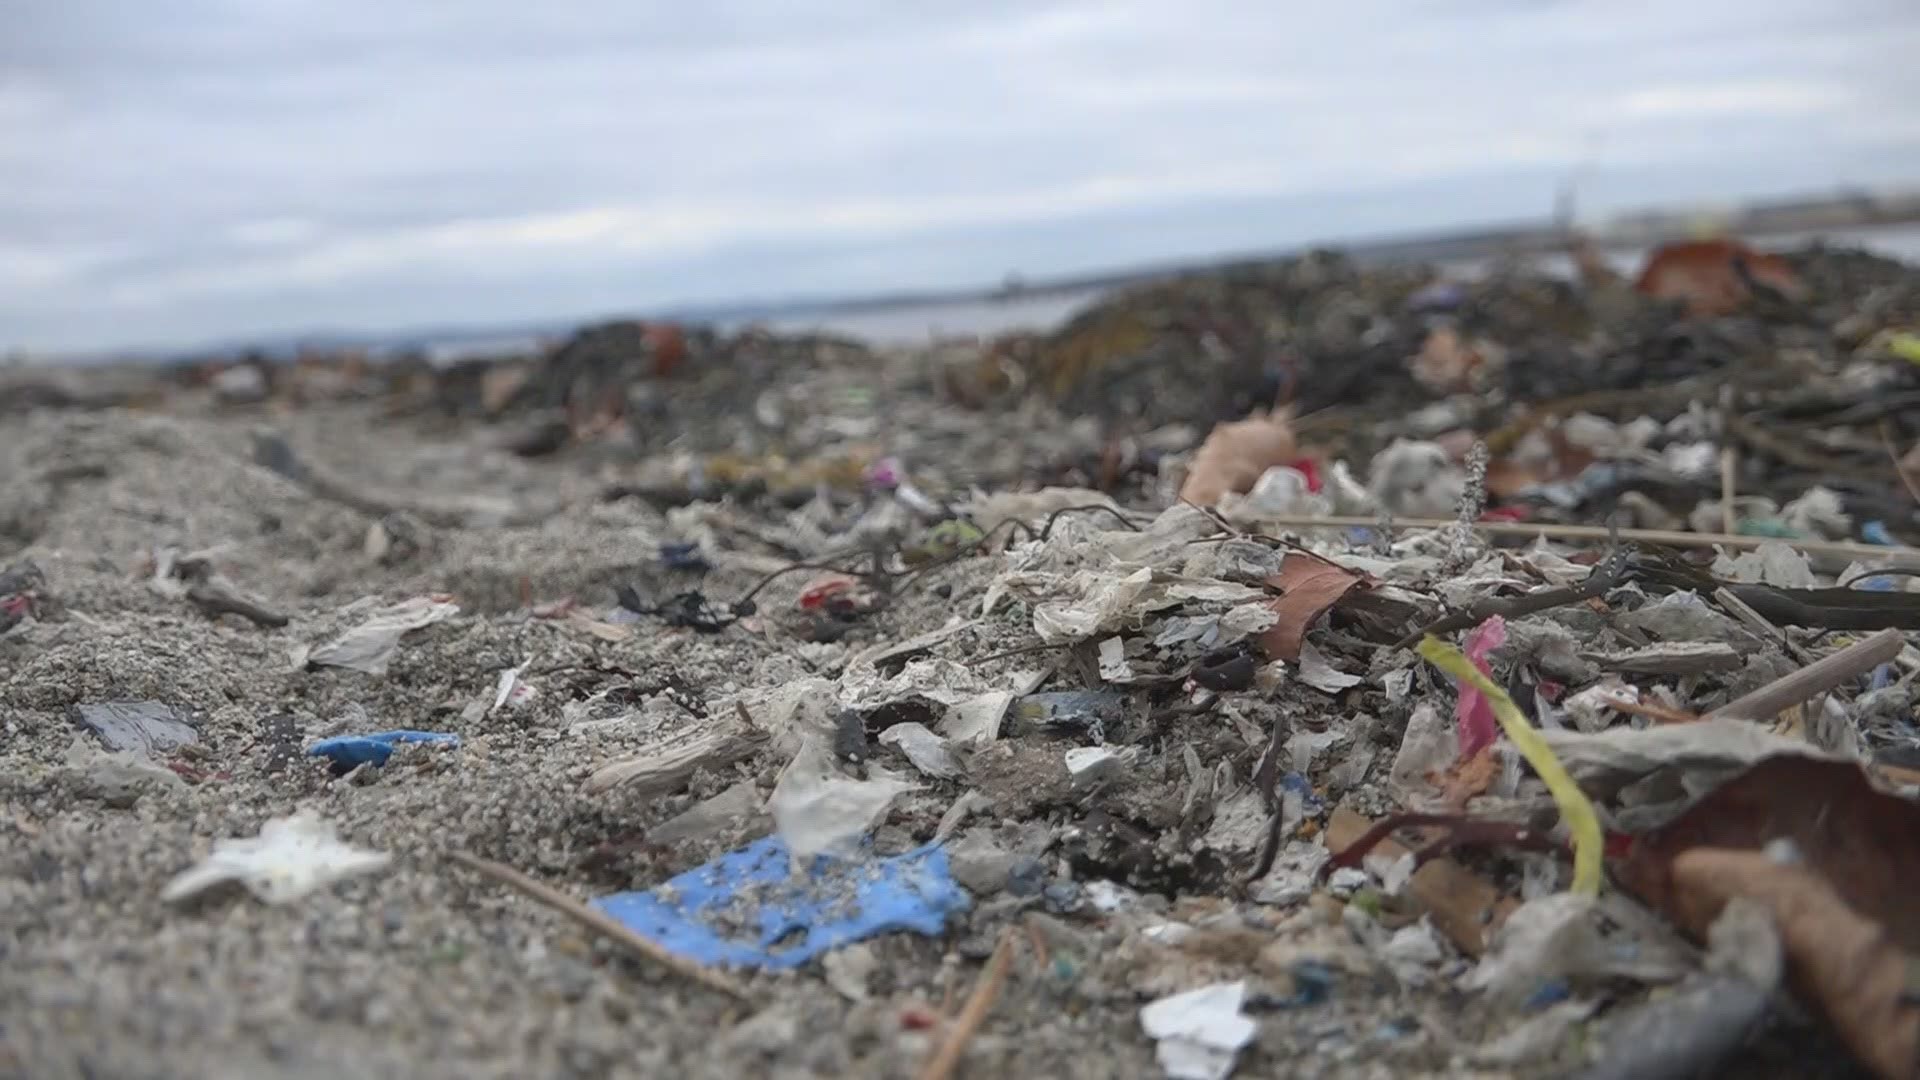 It's so important to do your part and recycle because when trash washes onto our beaches, it's Mainers doing the cleanup.